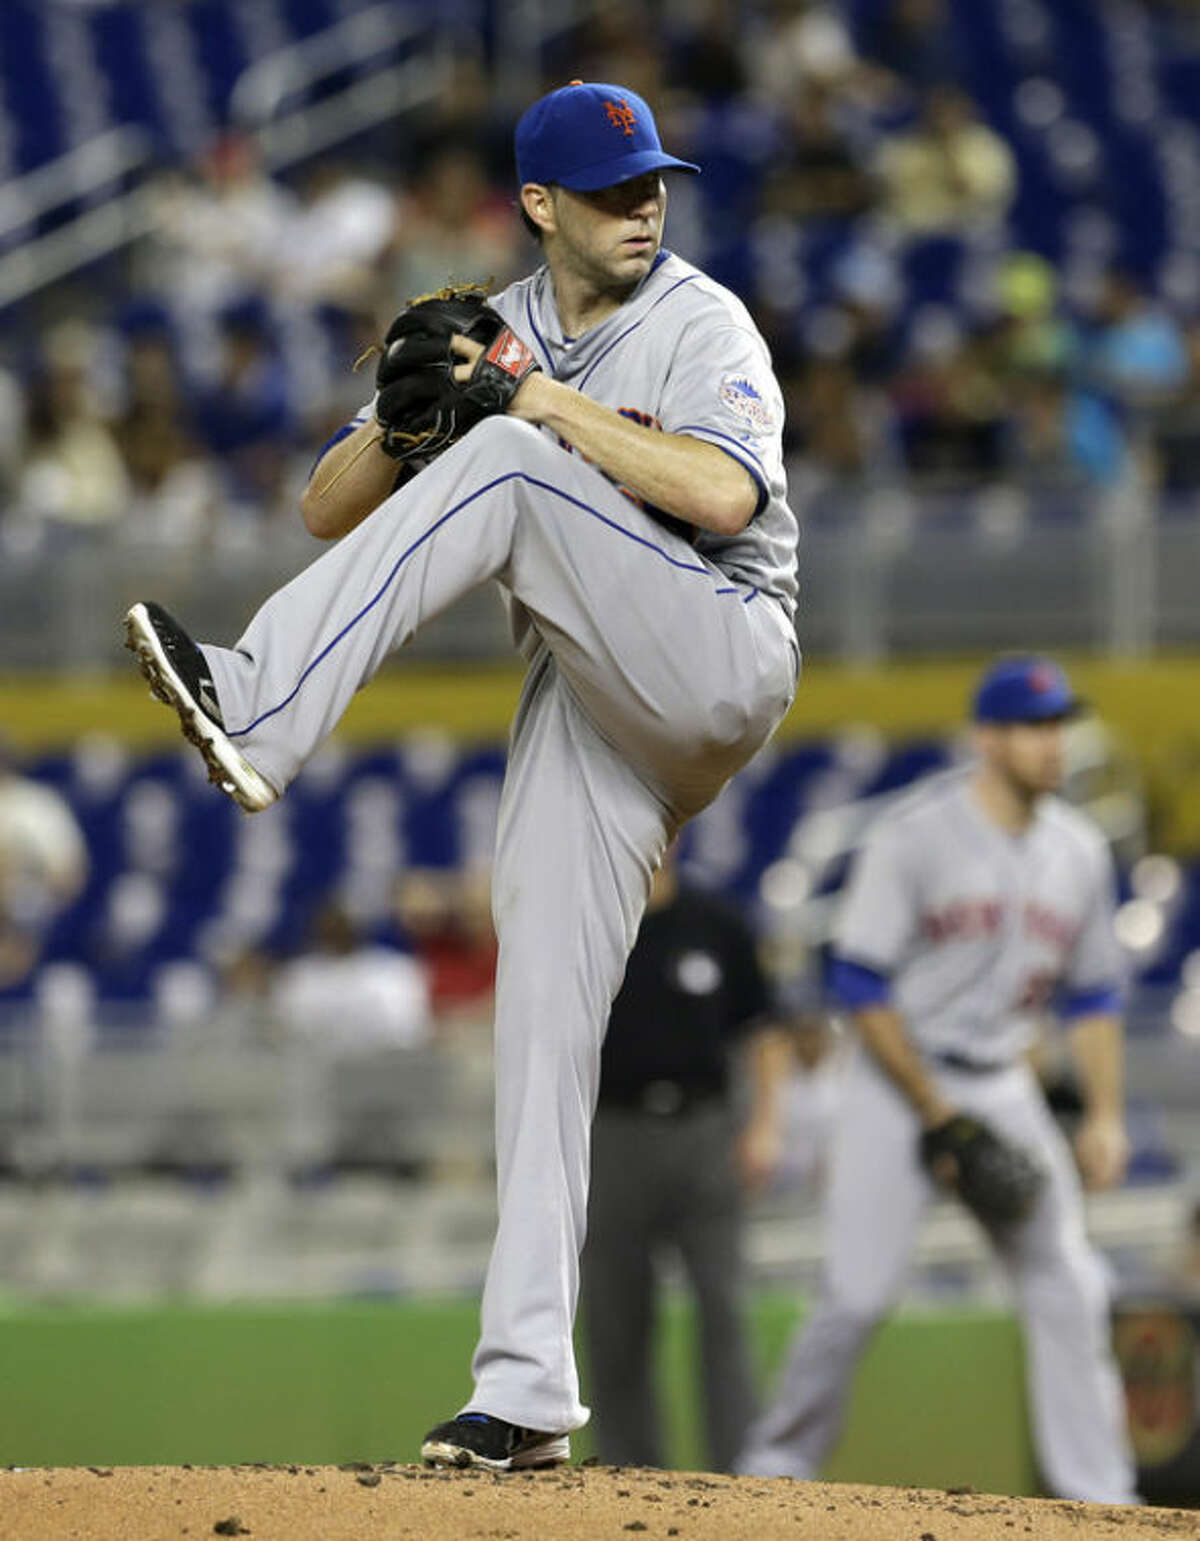 New York Mets' Shaun Marcum delivers to the Miami Marlins in the first inning of a baseball game, Friday, May 31, 2013, in Miami. (AP Photo/Alan Diaz)